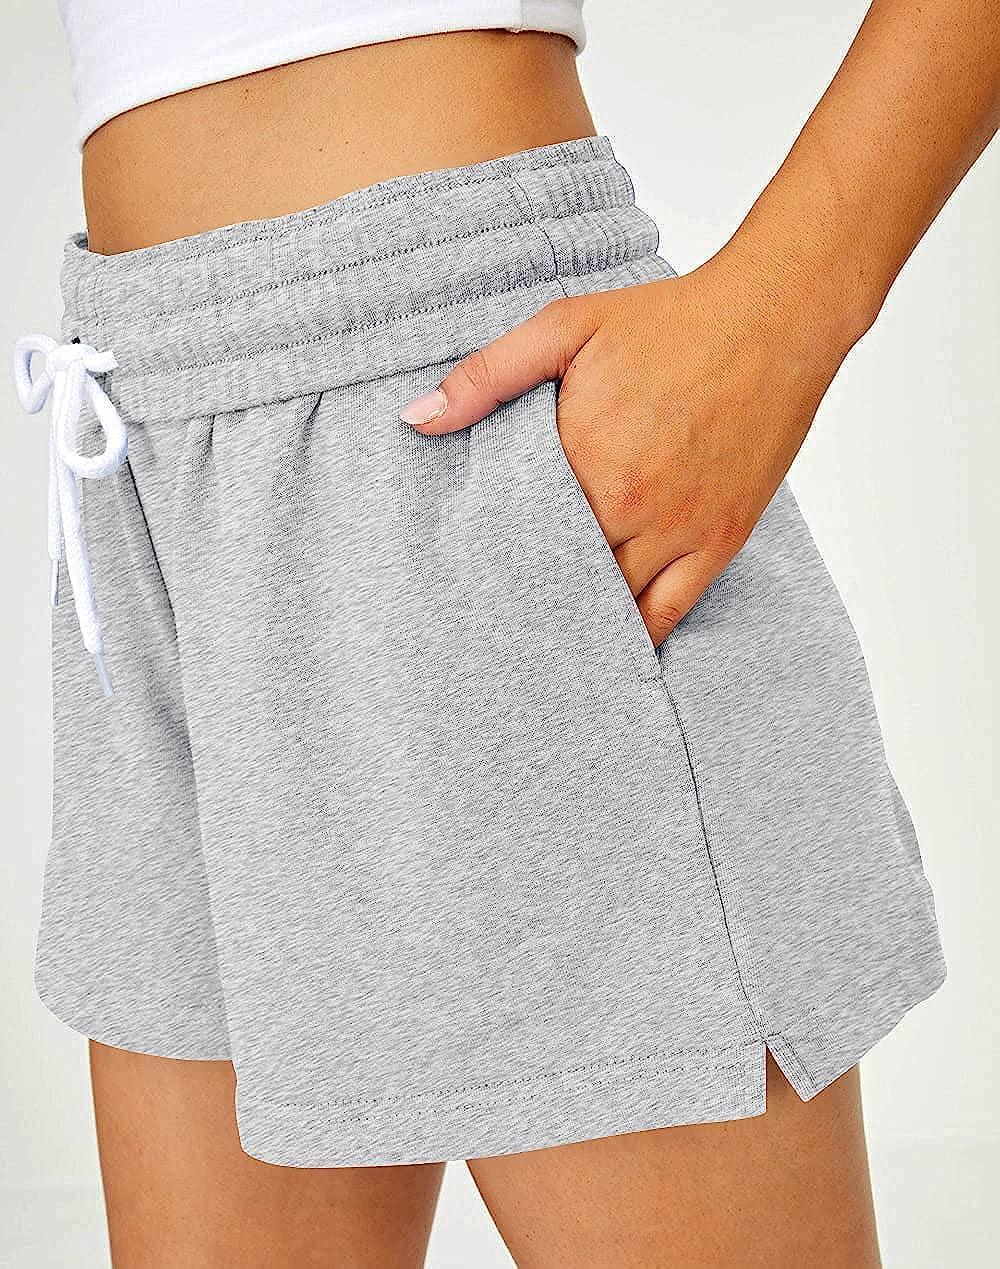  Women's Shorts Drawstring Rolled Hem Track Shorts LAIKIT (Color  : Light Grey, Size : Small) : Clothing, Shoes & Jewelry